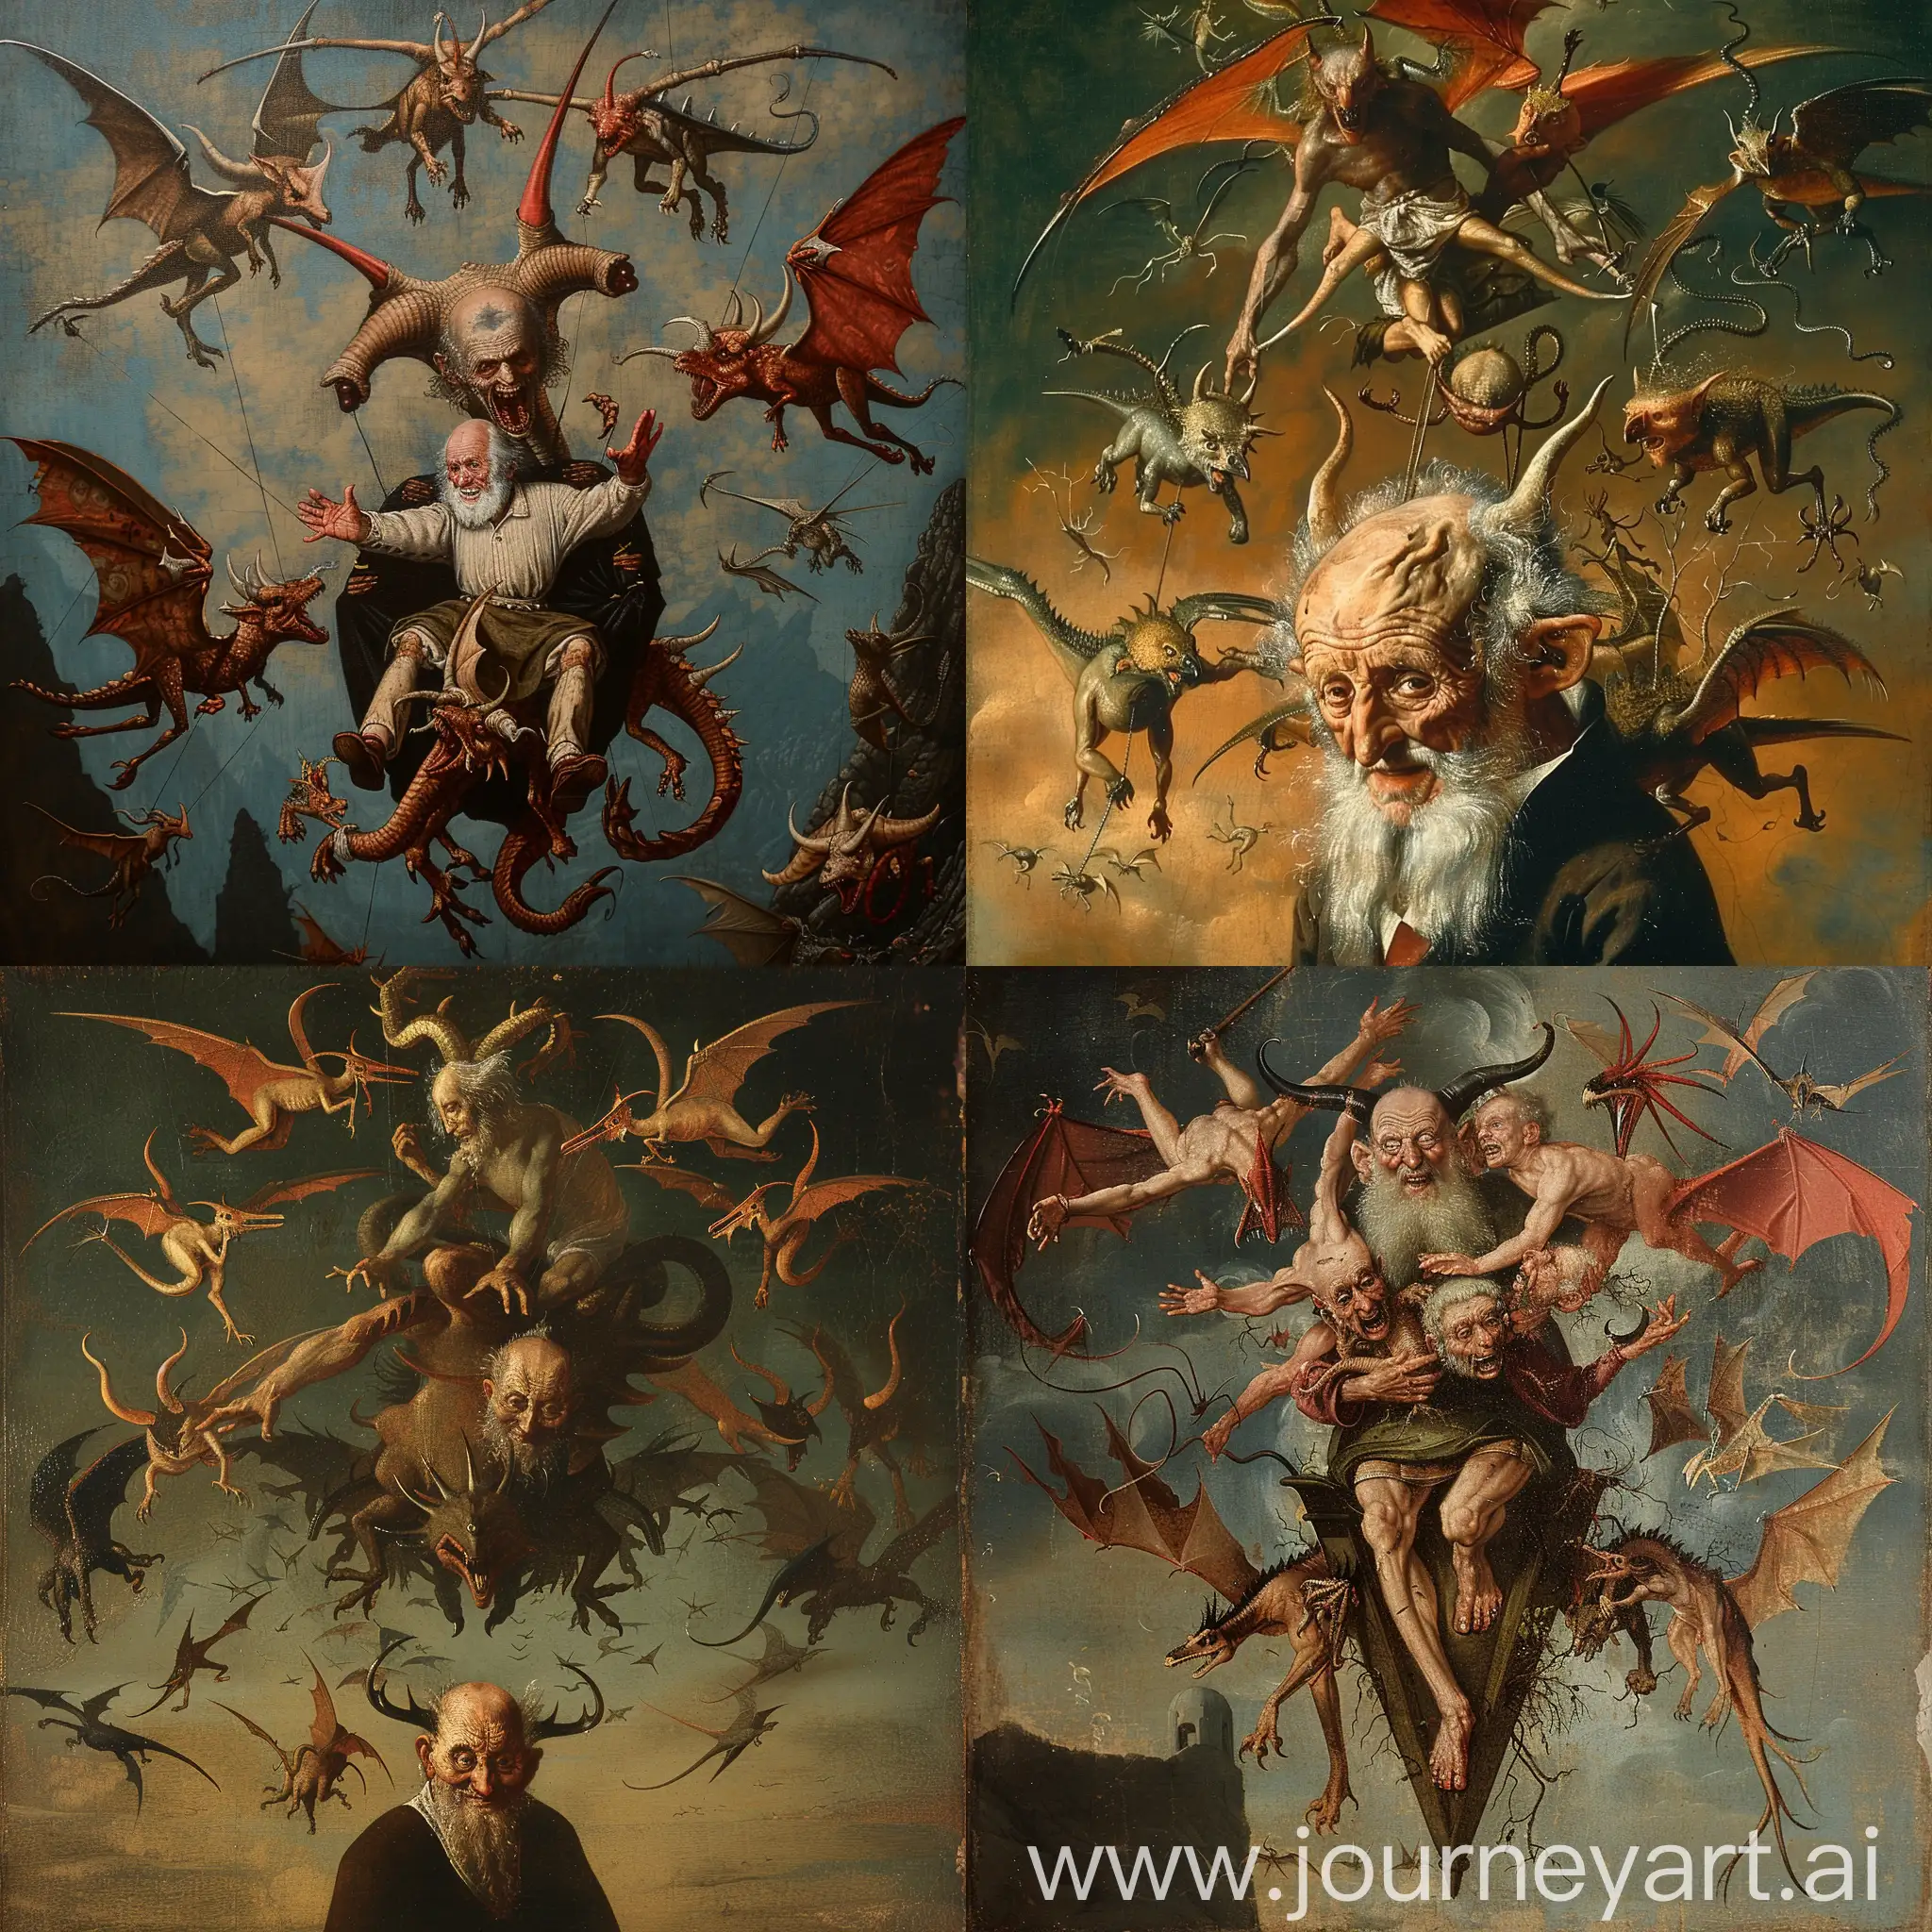 Masterful-Renaissance-Painting-Old-Man-Ascended-by-Flying-Demons-and-Mythical-Creatures